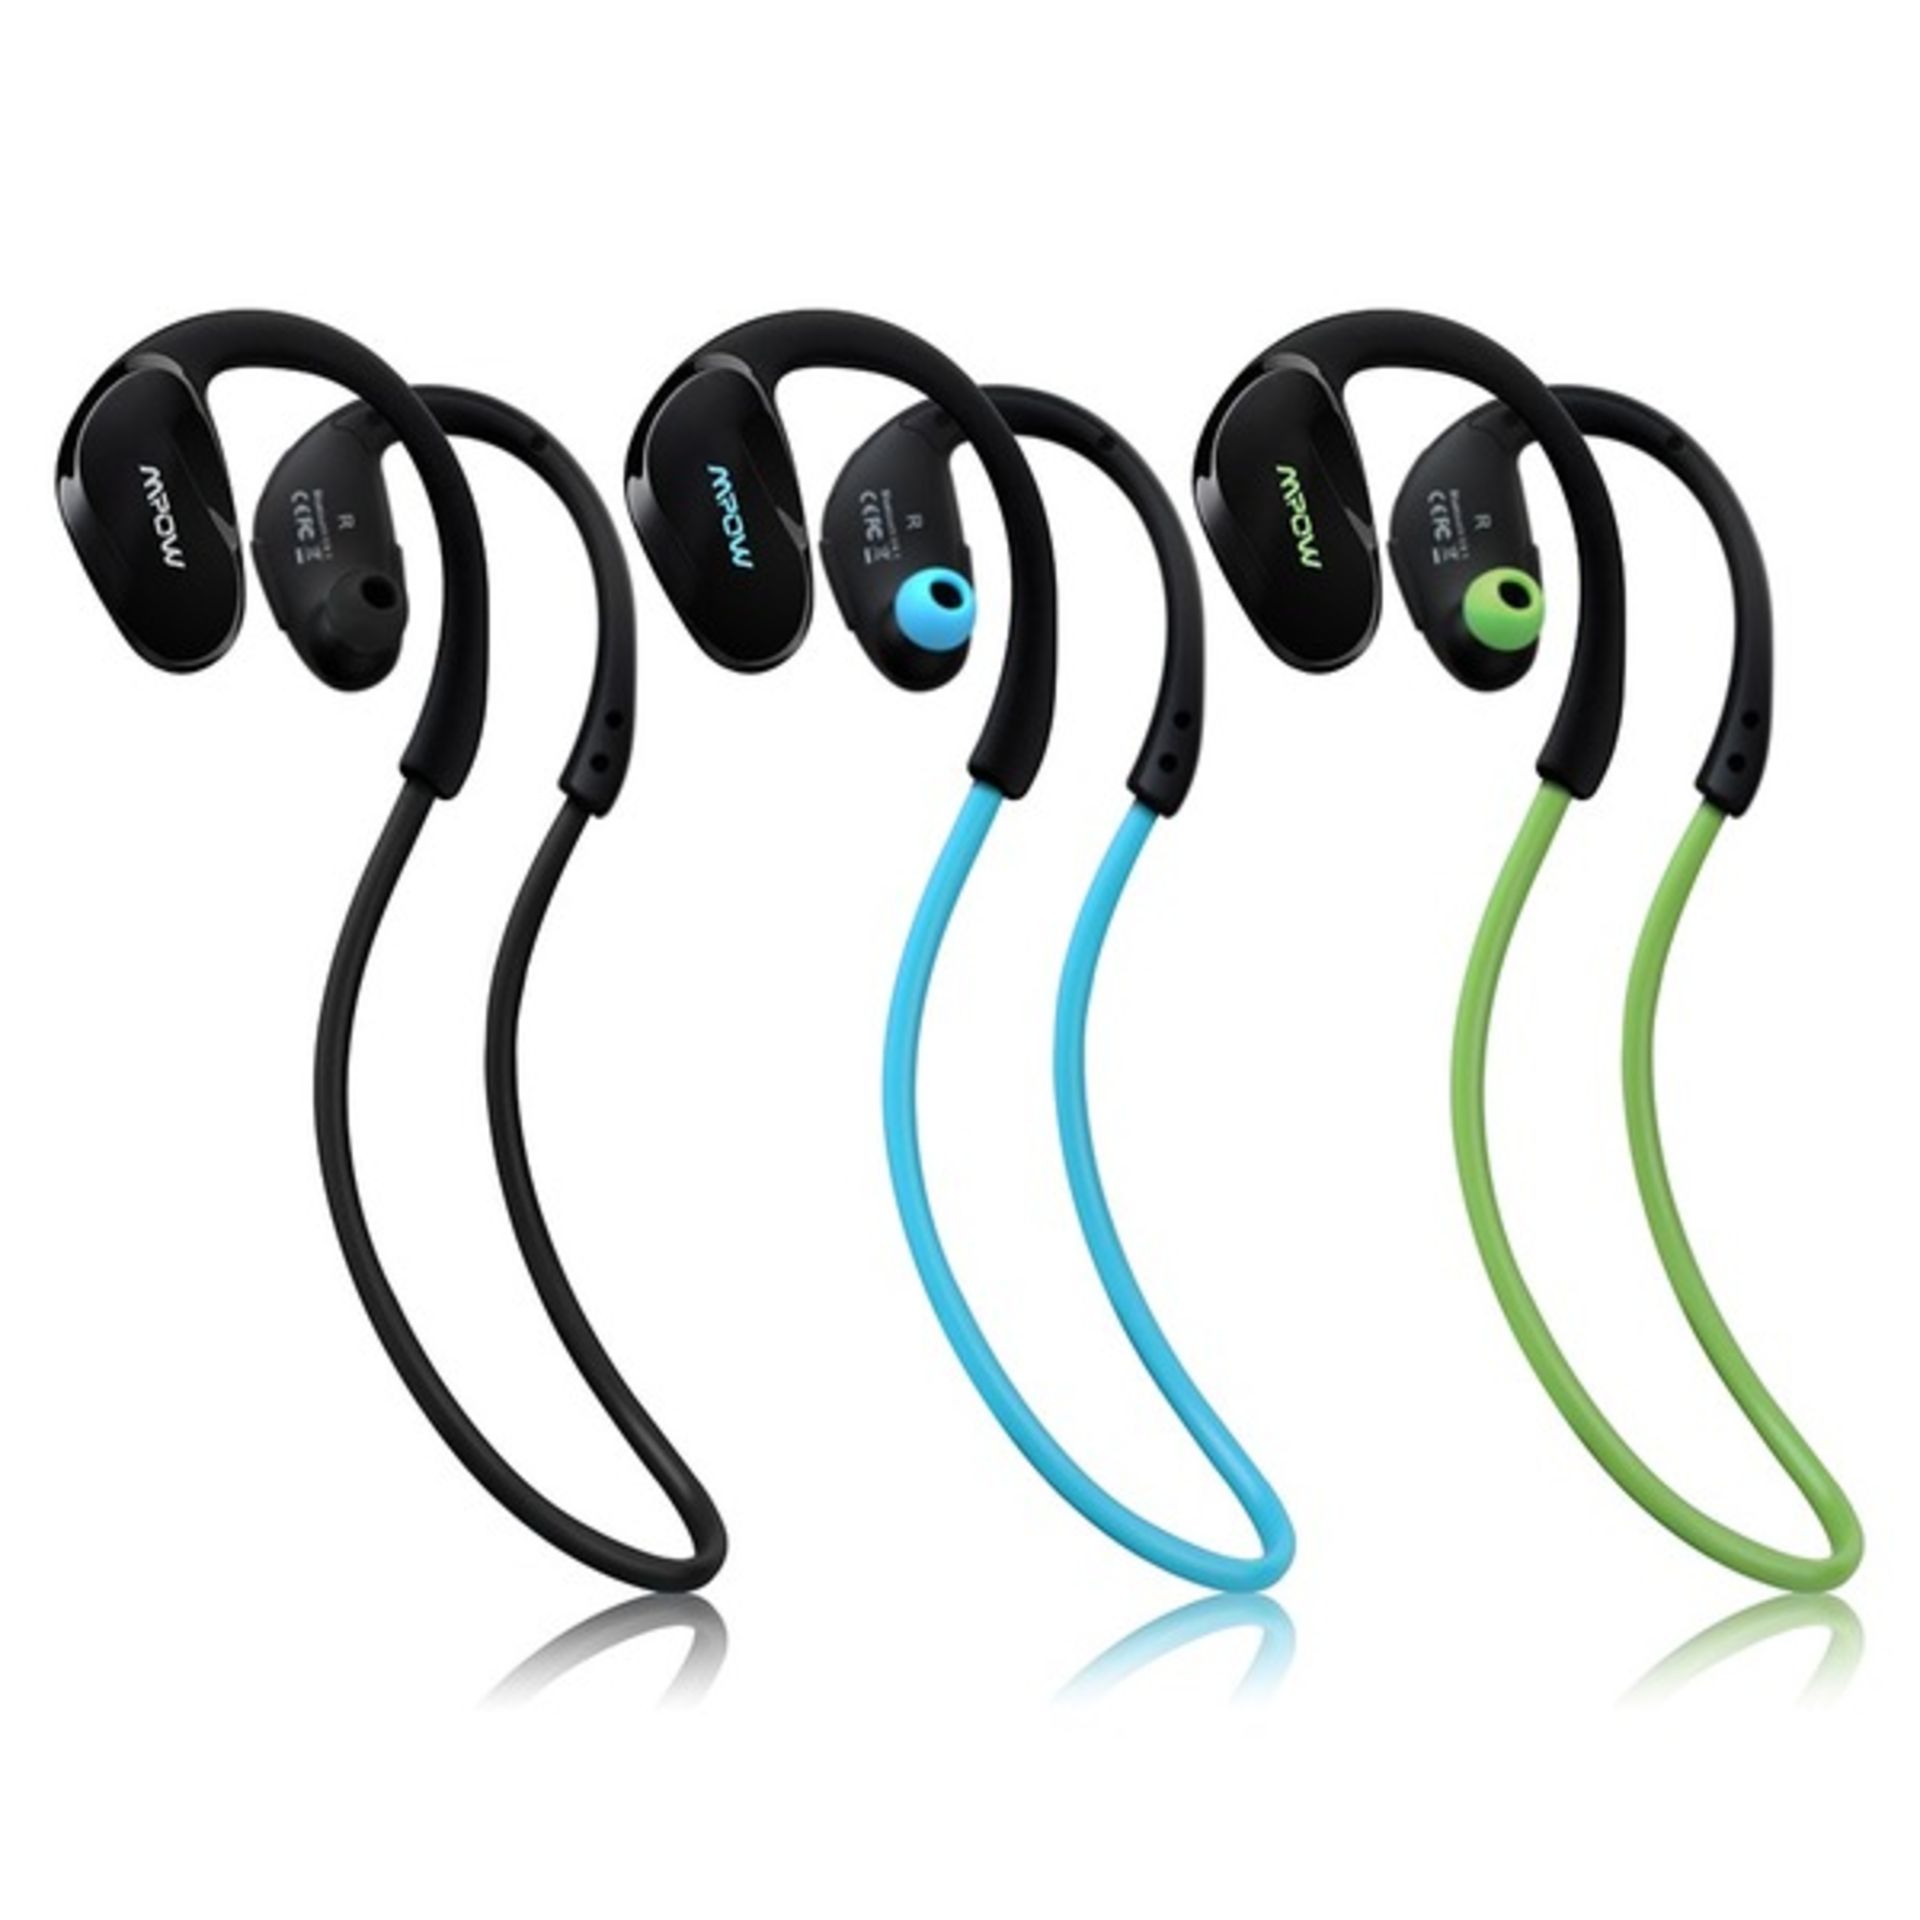 V *TRADE QTY* Brand New Pair of Bluetooth Earphones/Headset (All Boxed) - Colours and Styles/Makes - Image 3 of 7